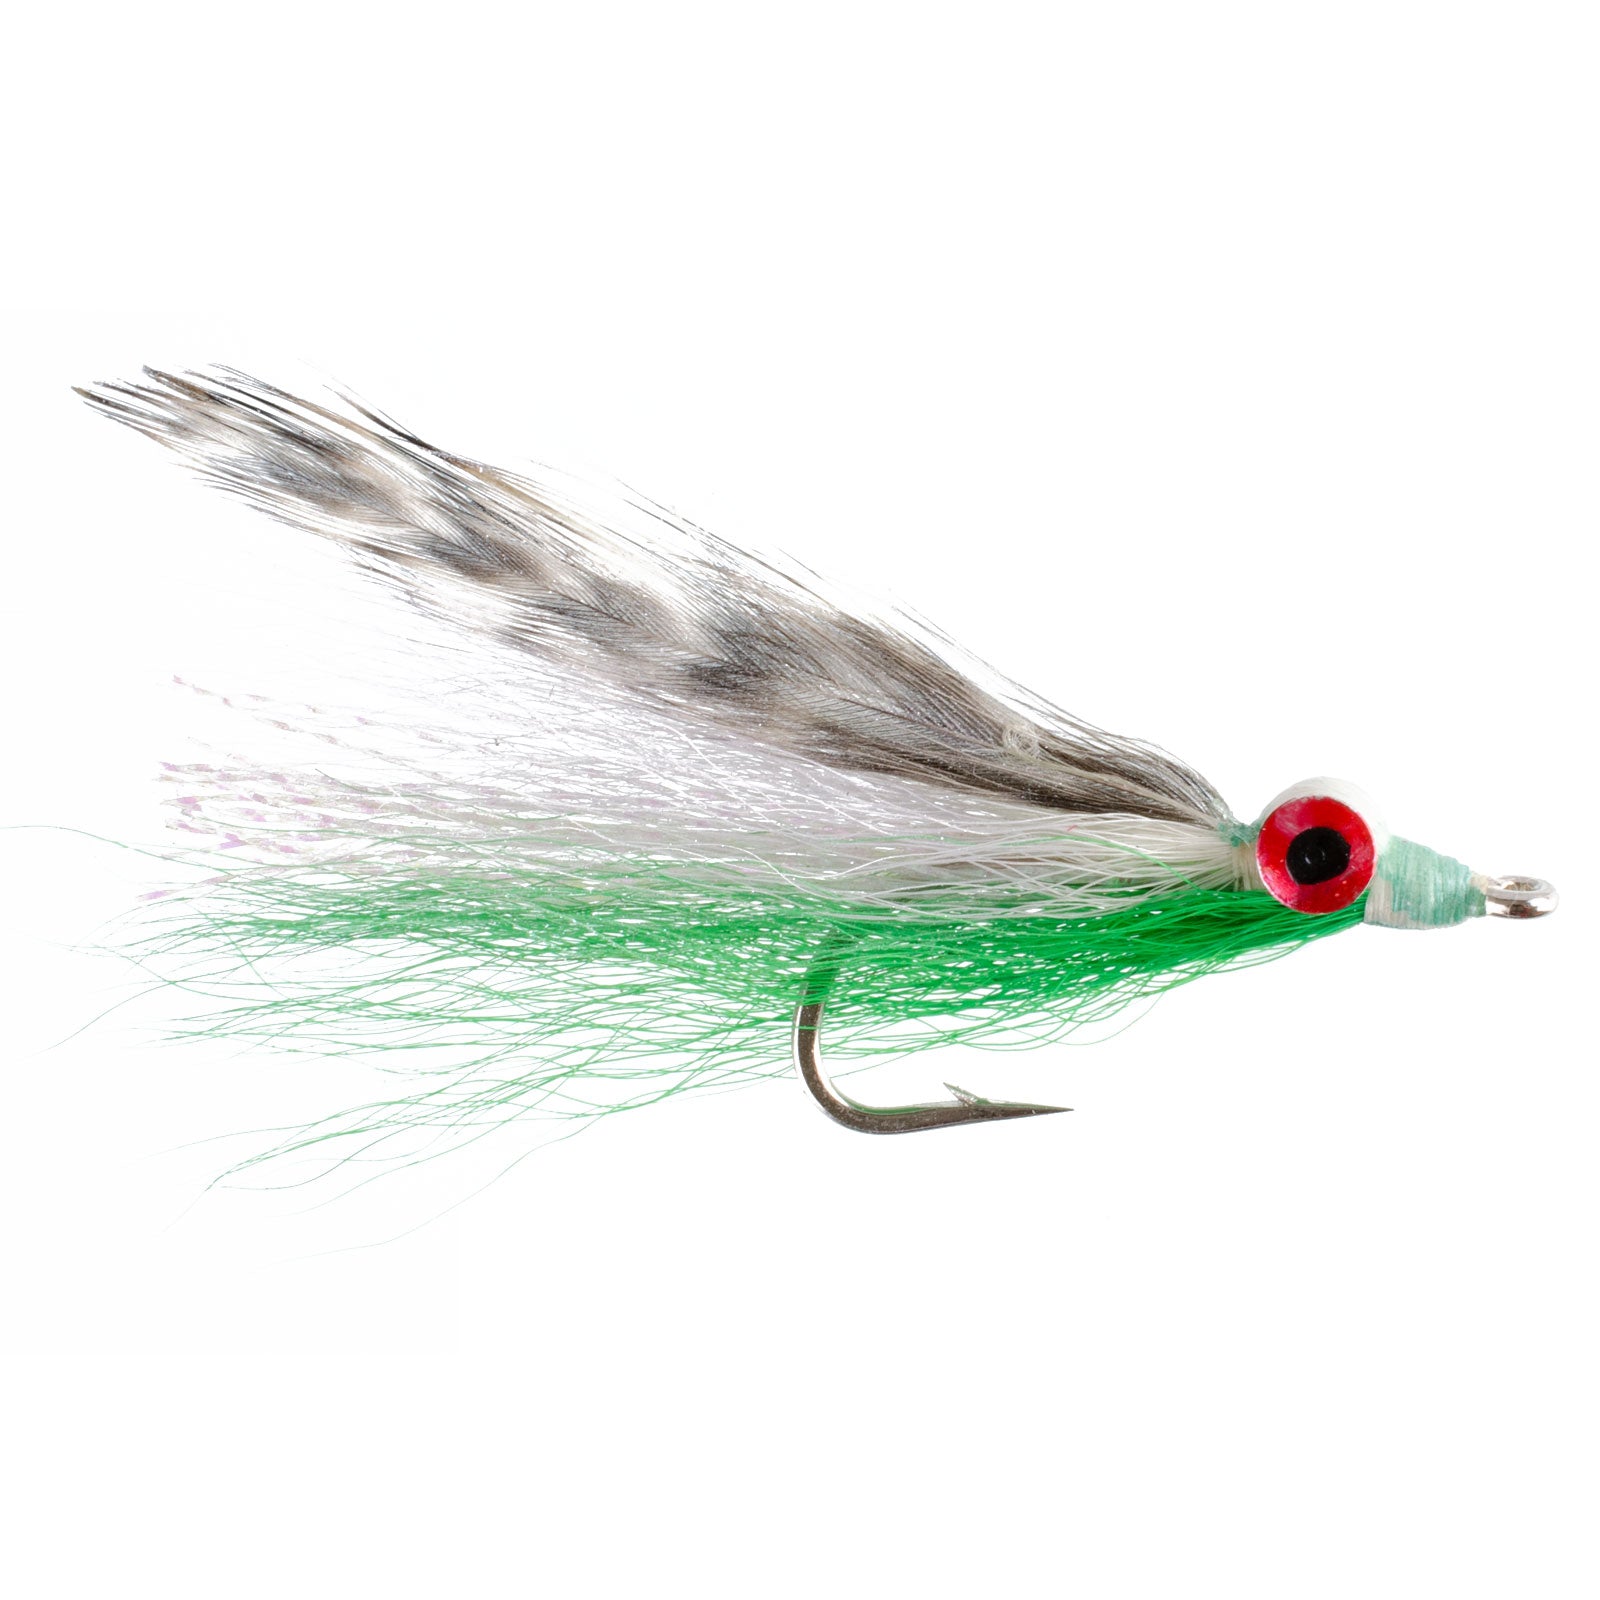 Clousers Clouceiver Deep Minnow Grizzly Green - Streamer Fly Fishing Flies - 4 Saltwater and Bass Flies - Hook Size 1/0